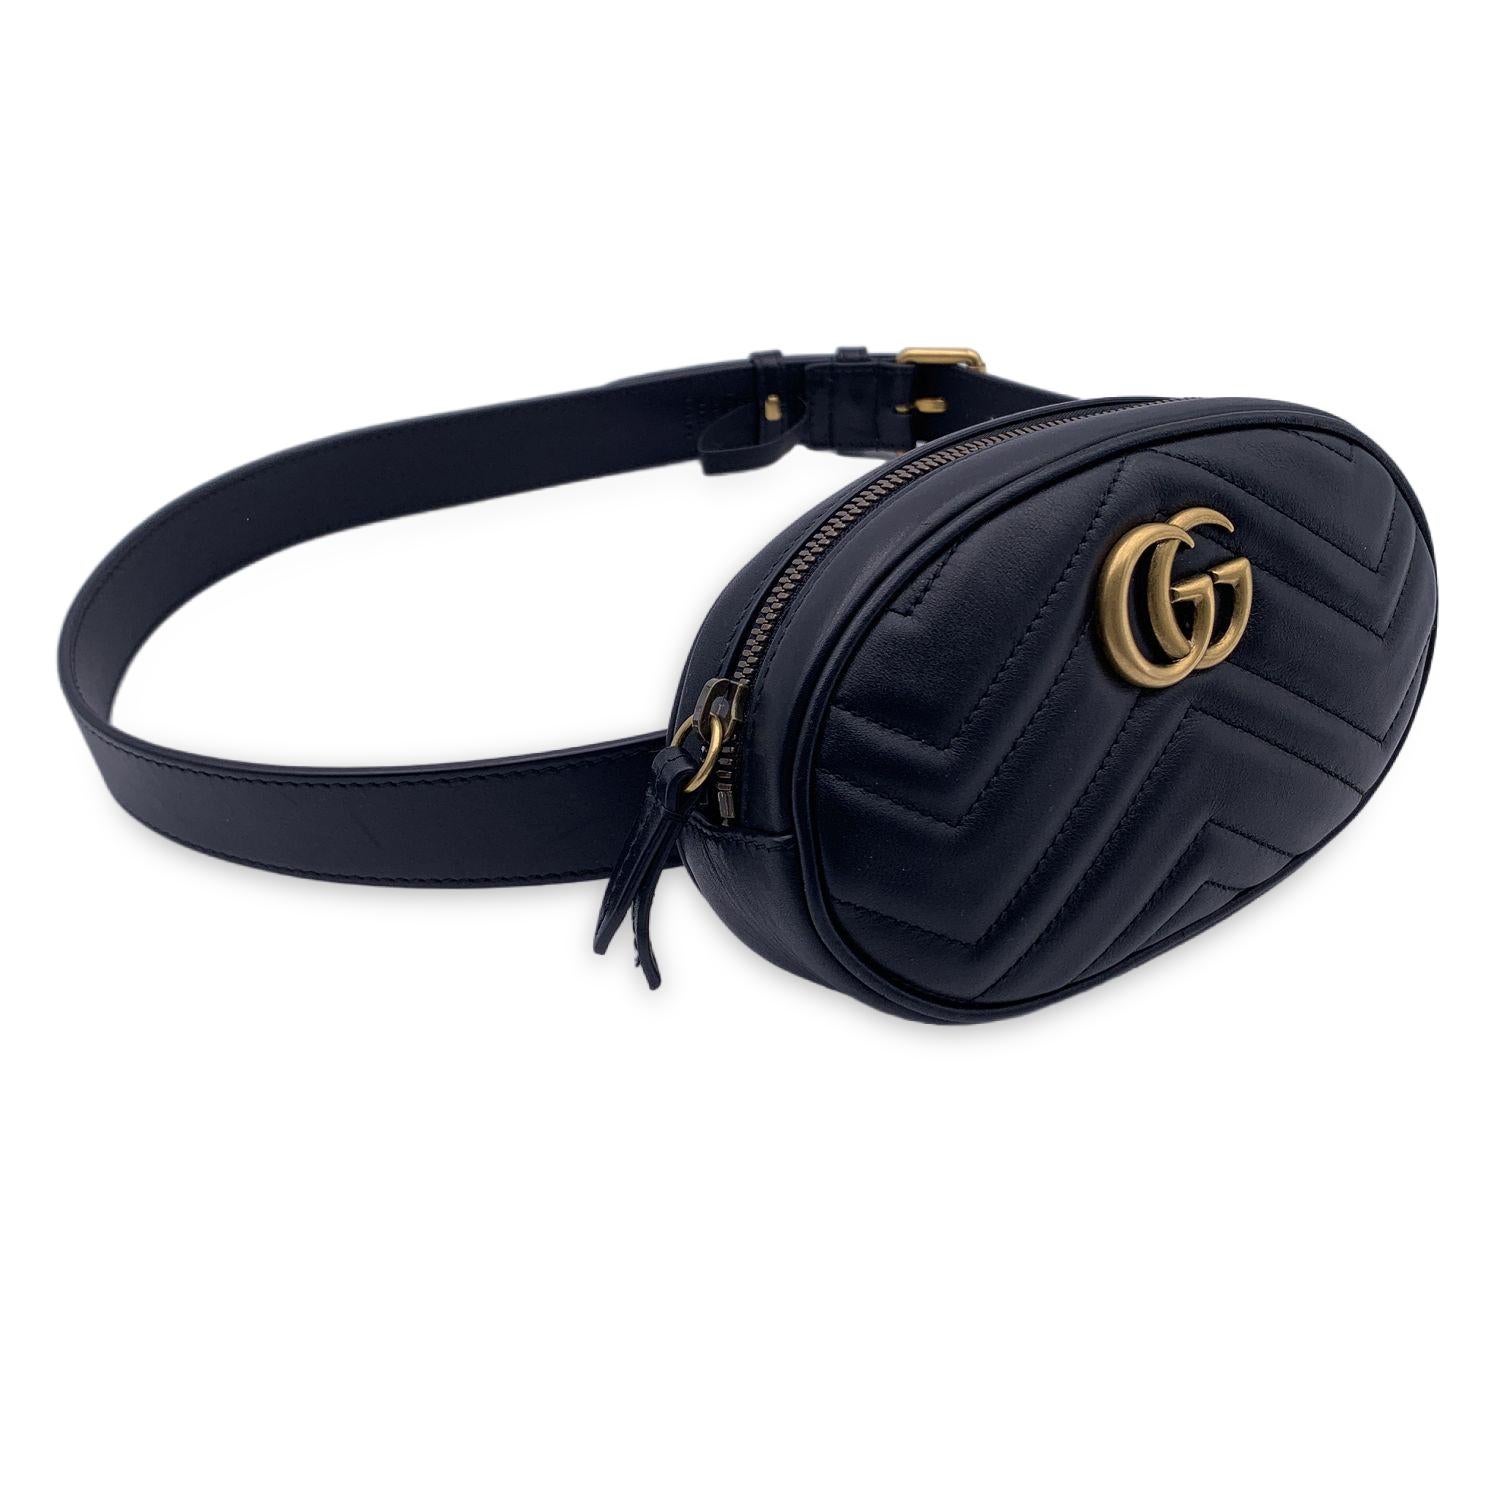 Gucci GG Marmont Belt Bag. in black leather. Chevron quilted leather. Gold metal GG logo on the front. Upper zip closure. 1 open pocket inside. Lined interior. Adjustable belt strap. Size: 85/34. 'Gucci - Made in Italy' tag inside (with serial